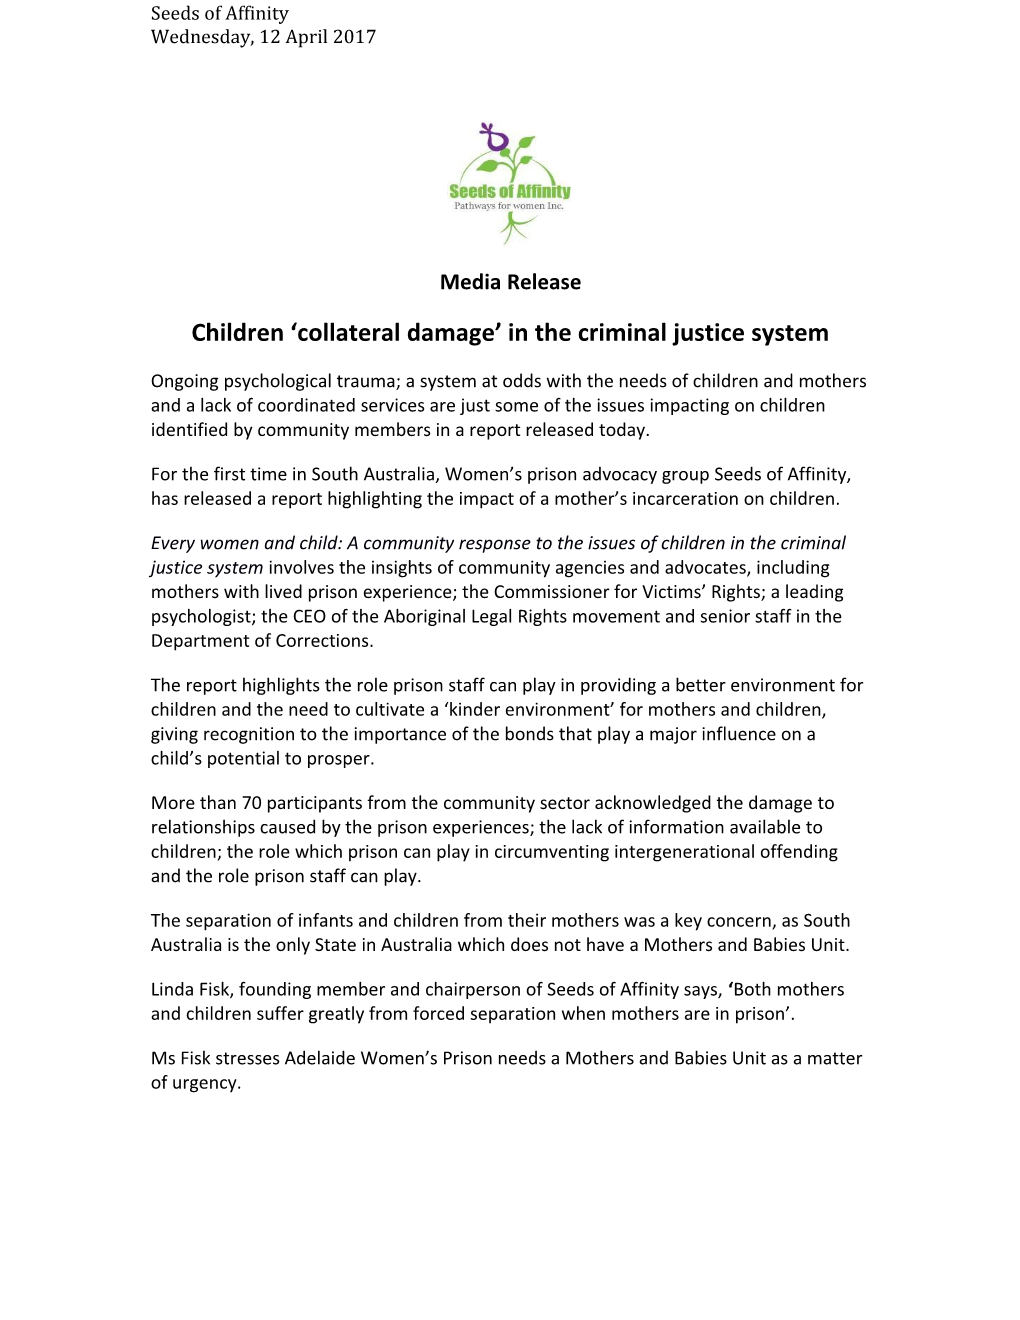 Children Collateral Damage in the Criminal Justice System